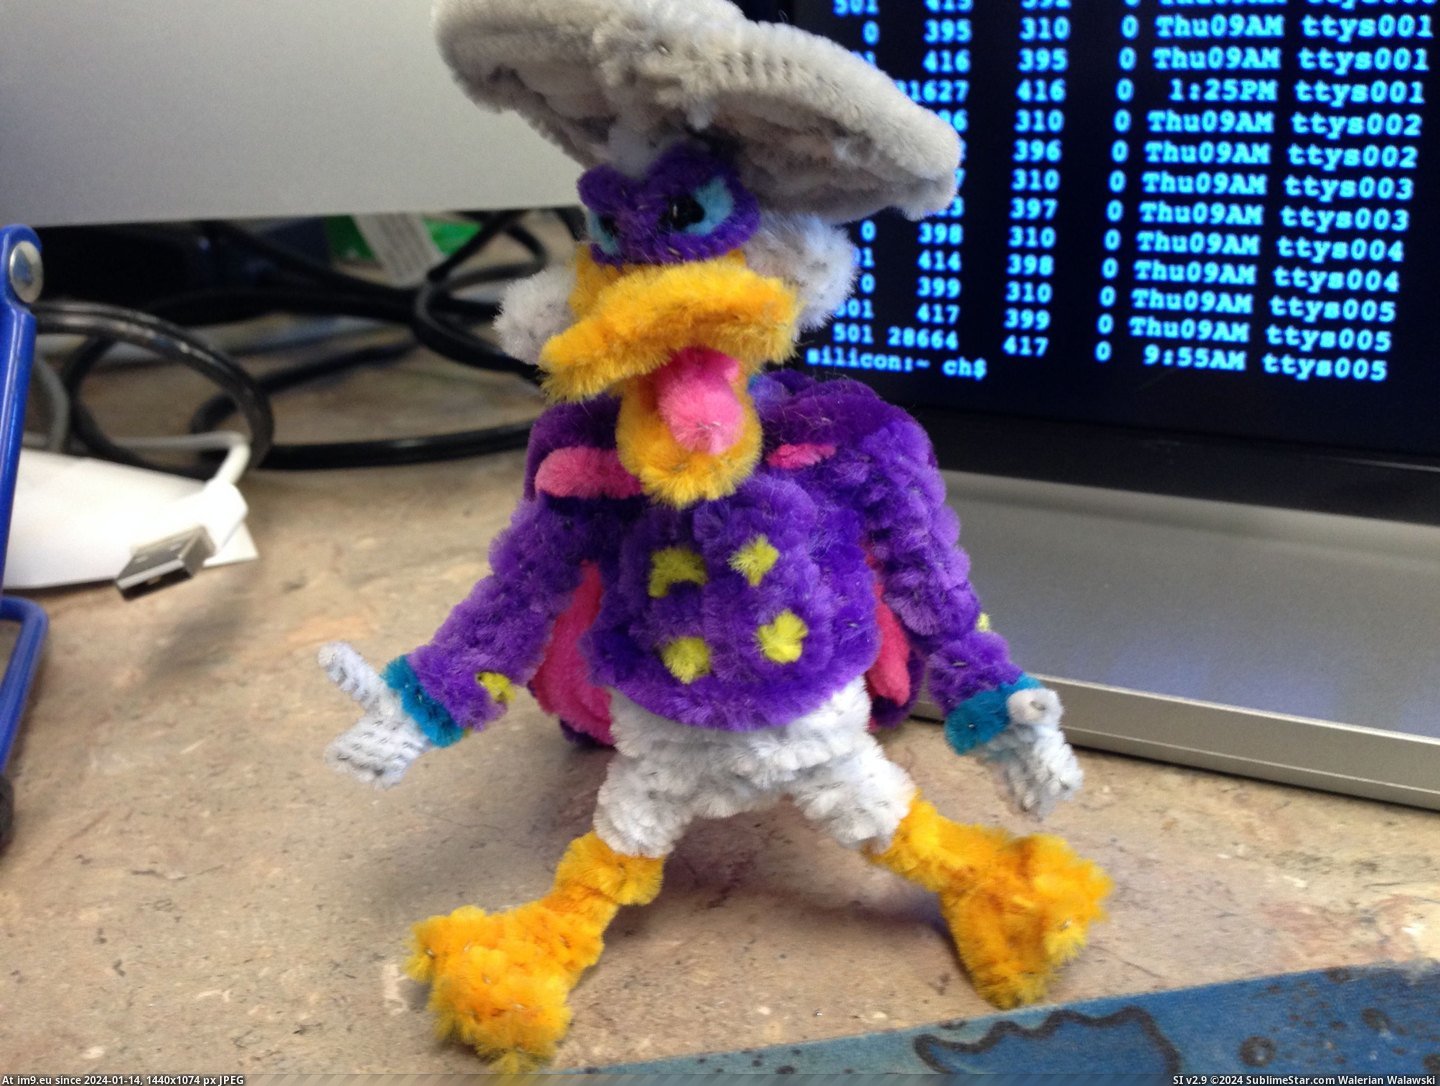 #State #Alaska #Duck #Cleaners #Darkwing #Created #Pipe #Fair [Pics] Darkwing Duck created entirely with pipe cleaners. Found at the Alaska State Fair. Pic. (Bild von album My r/PICS favs))